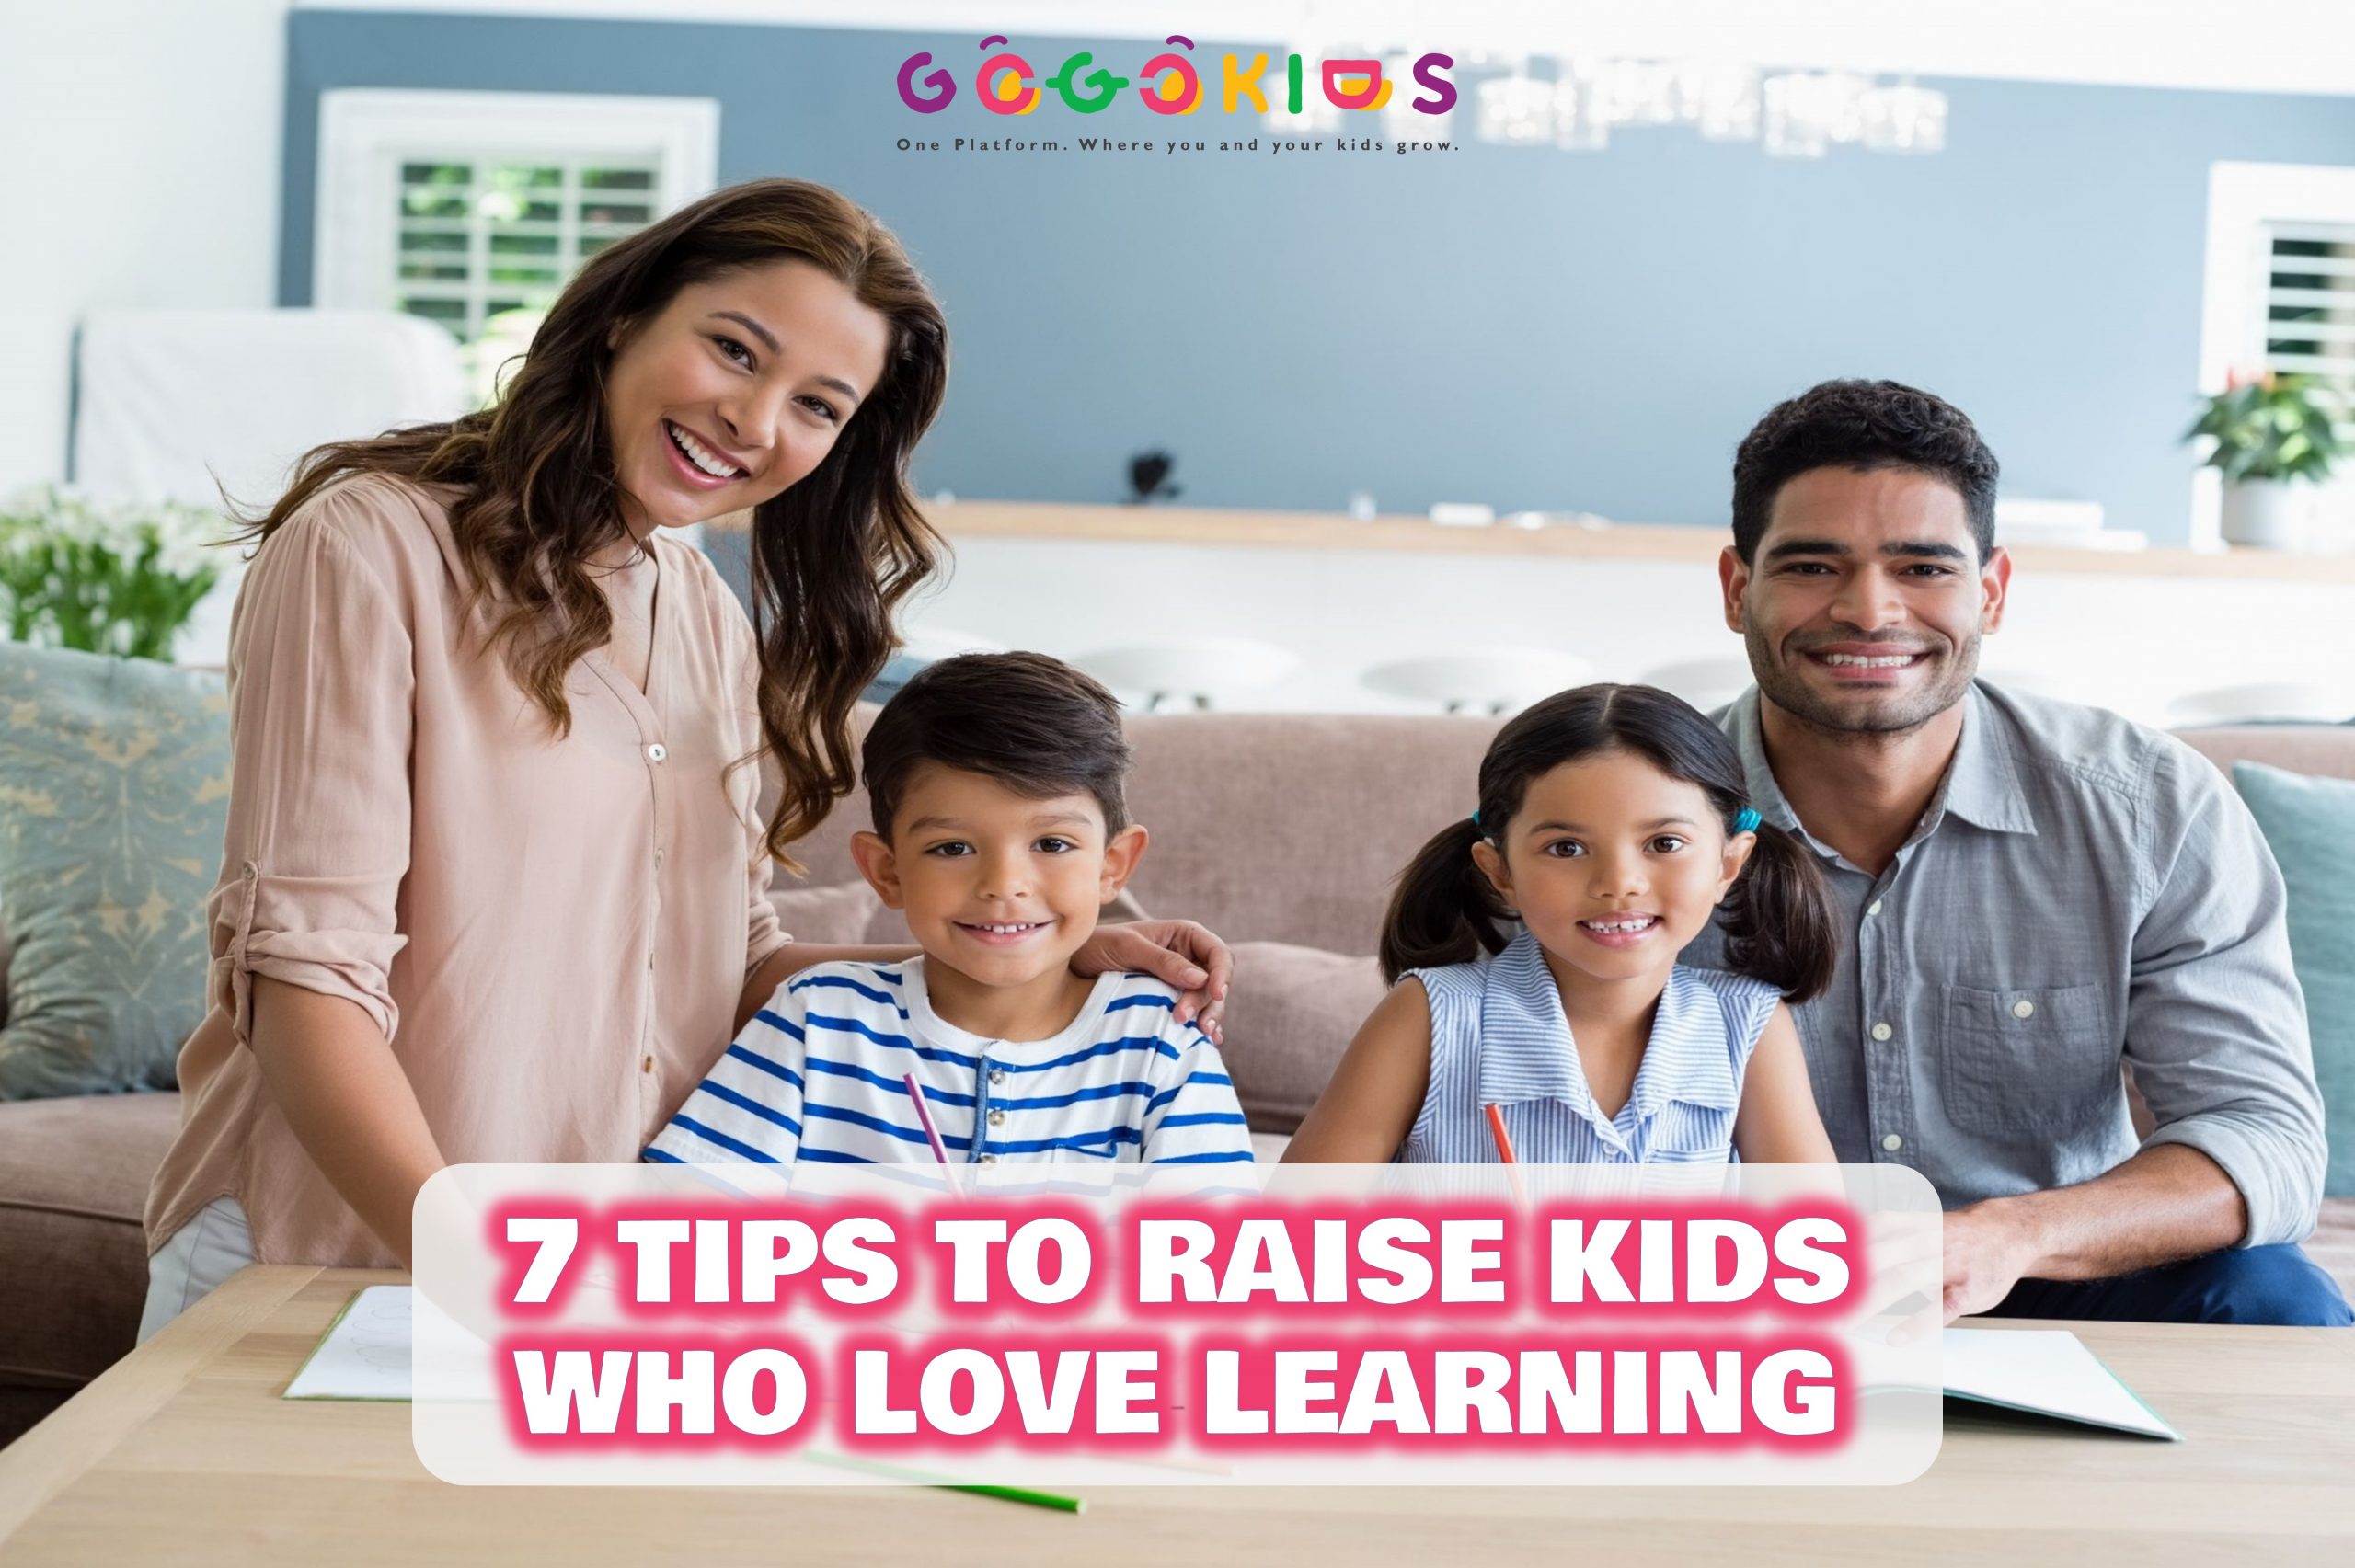 7 Tips to Raise Kids Who Love Learning